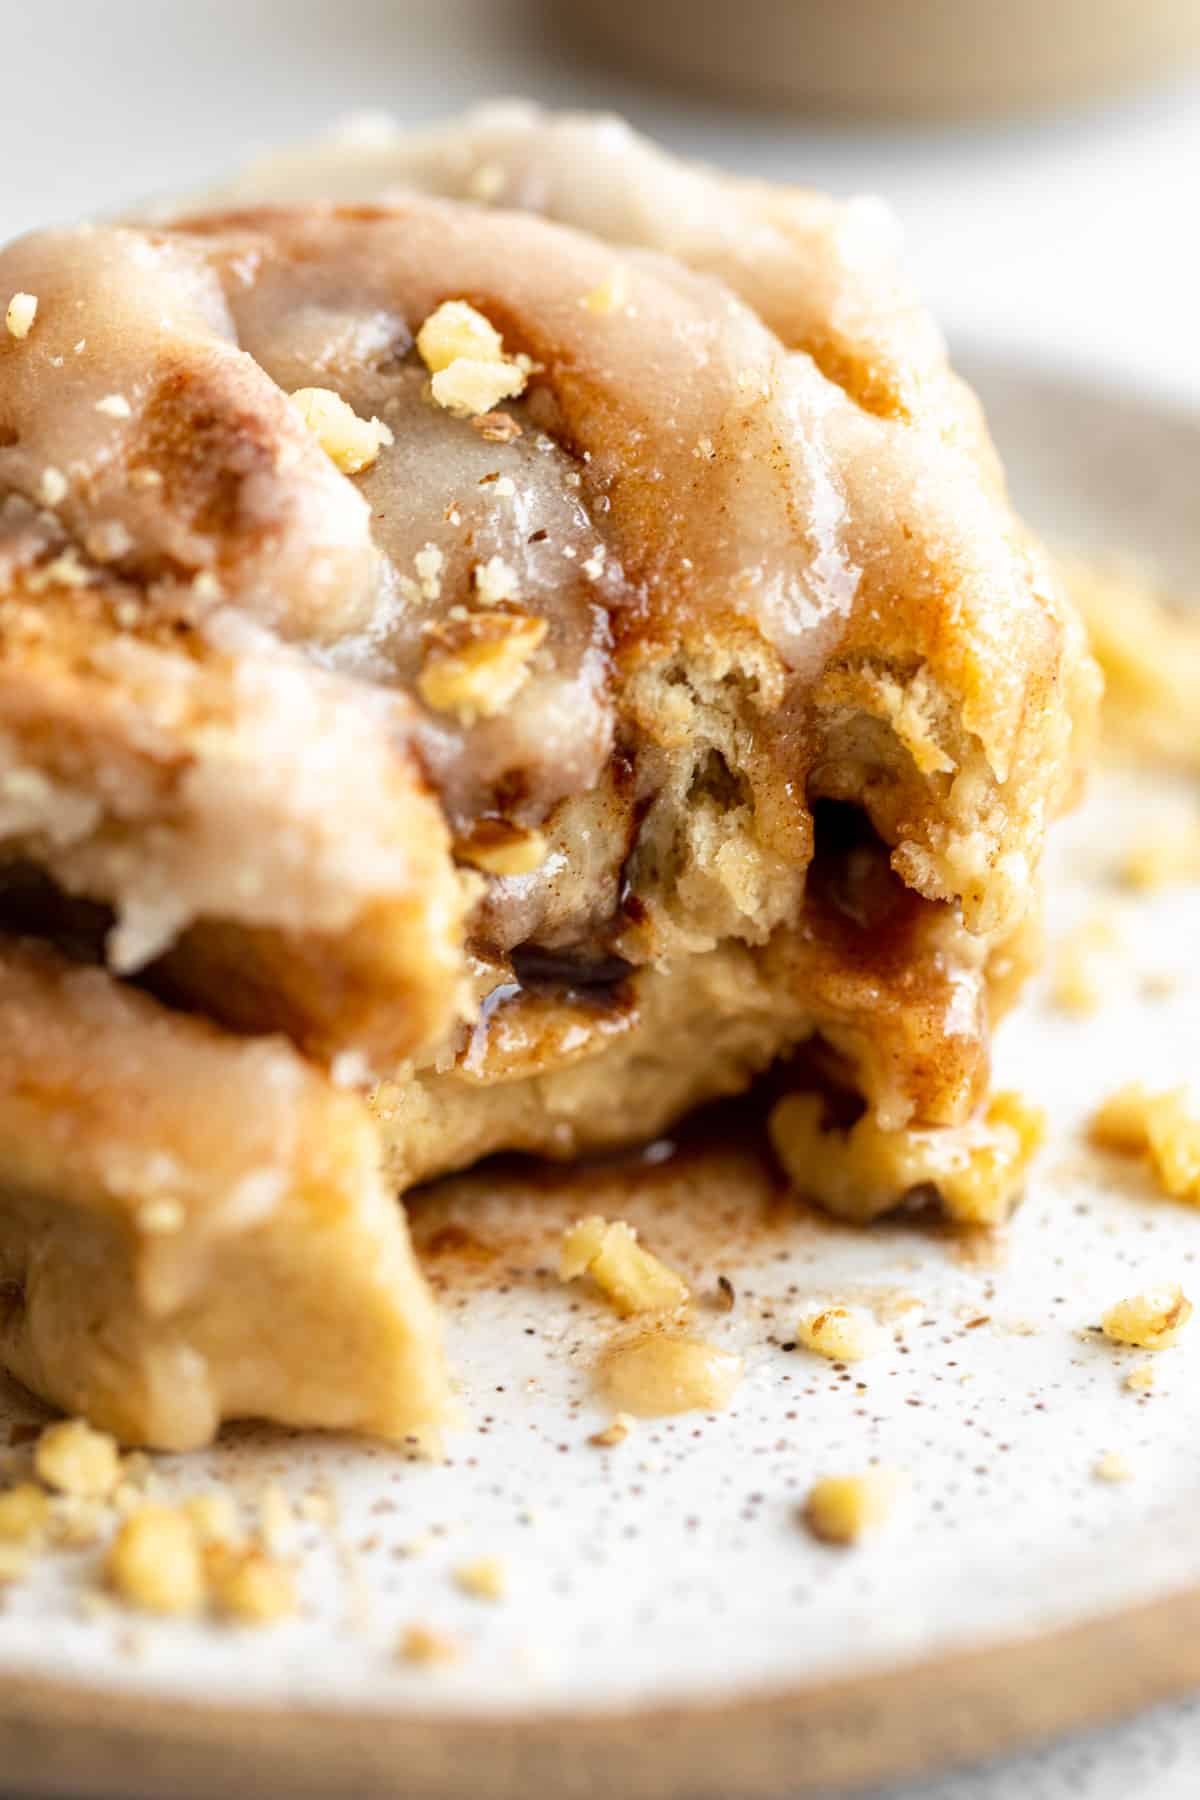 gluten free banana bread cinnamon roll with a bite taken out